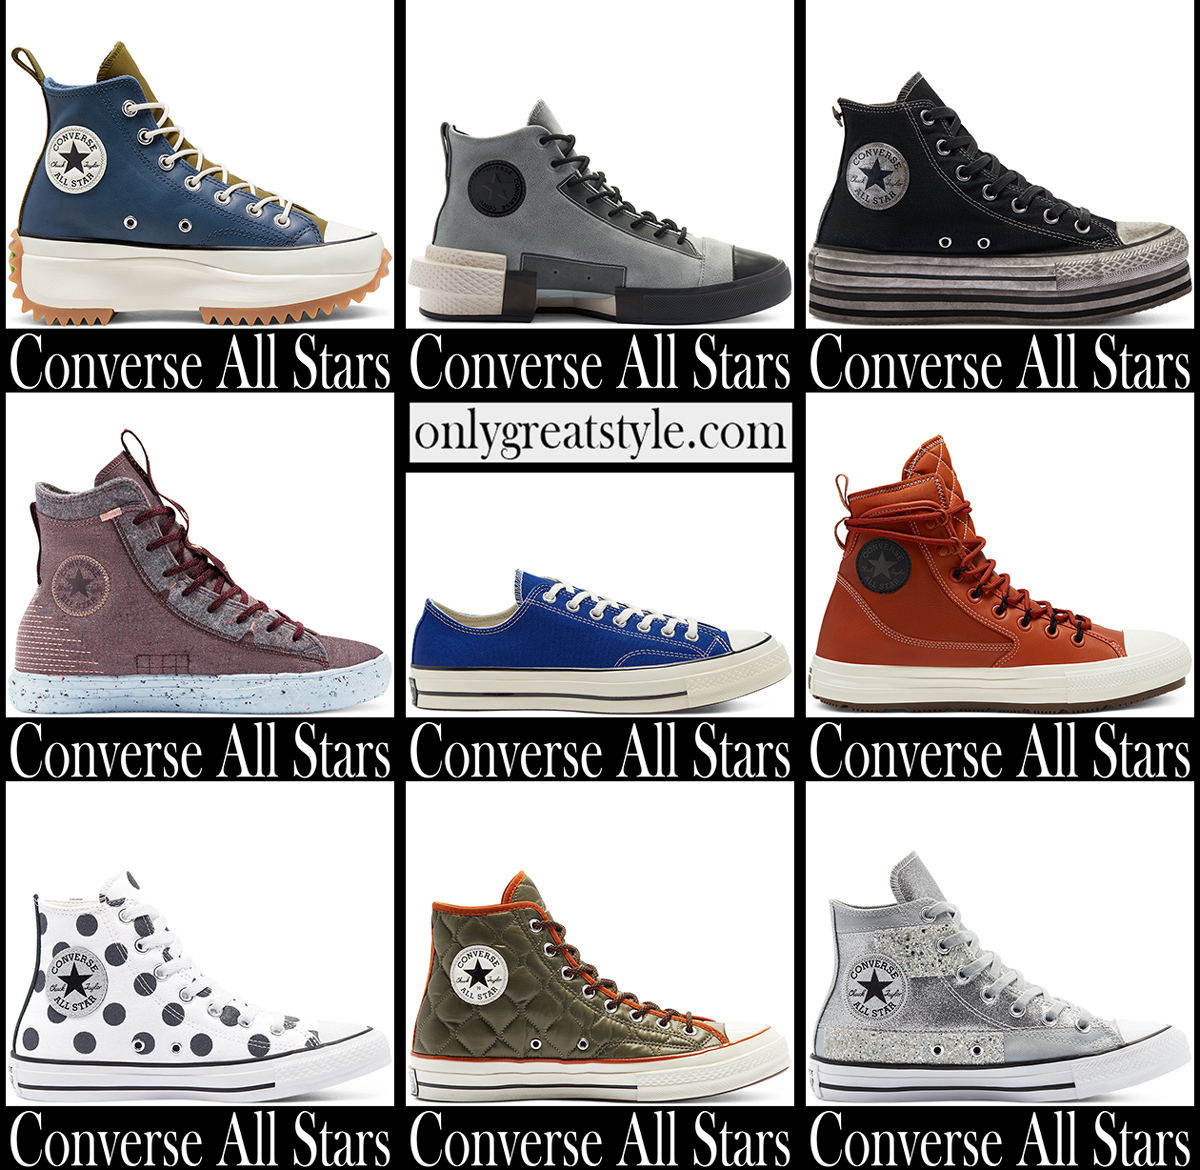 Converse sneakers 2021 new arrivals womens All Stars